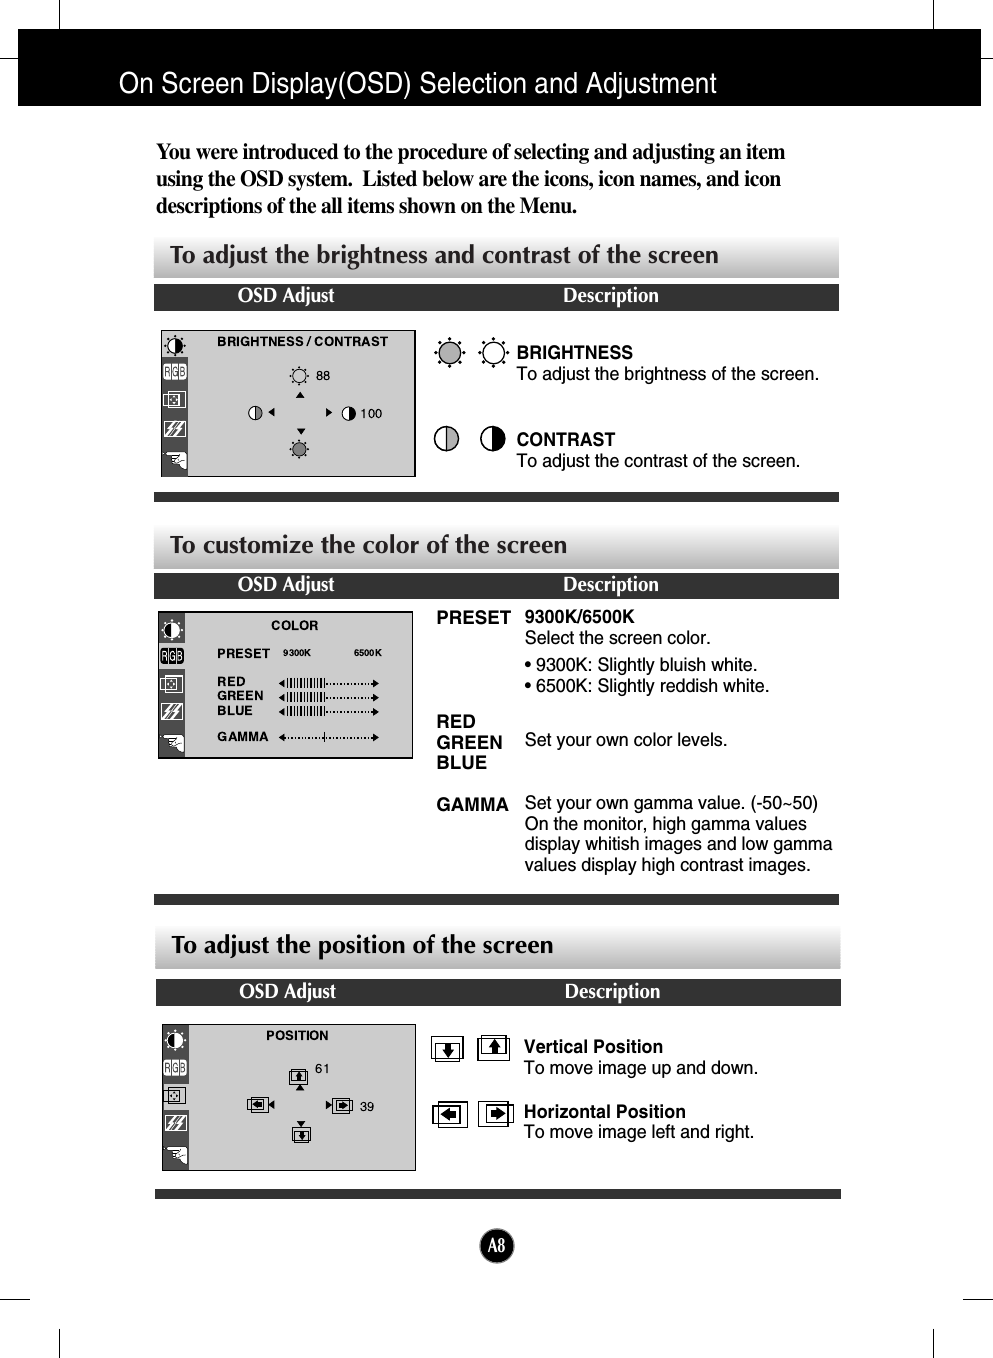 A8On Screen Display(OSD) Selection and Adjustment You were introduced to the procedure of selecting and adjusting an itemusing the OSD system.  Listed below are the icons, icon names, and icondescriptions of the all items shown on the Menu.OSD Adjust DescriptionBRIGHTNESSTo adjust the brightness of the screen. CONTRAST To adjust the contrast of the screen.Vertical PositionTo move image up and down.Horizontal PositionTo move image left and right.To adjust the brightness and contrast of the screenTo adjust the position of the screen OSD Adjust DescriptionPRESETREDGREENBLUEGAMMA9300K/6500KSelect the screen color. • 9300K: Slightly bluish white.• 6500K: Slightly reddish white.Set your own color levels.Set your own gamma value. (-50~50) On the monitor, high gamma valuesdisplay whitish images and low gammavalues display high contrast images.To customize the color of the screenOSD Adjust Description